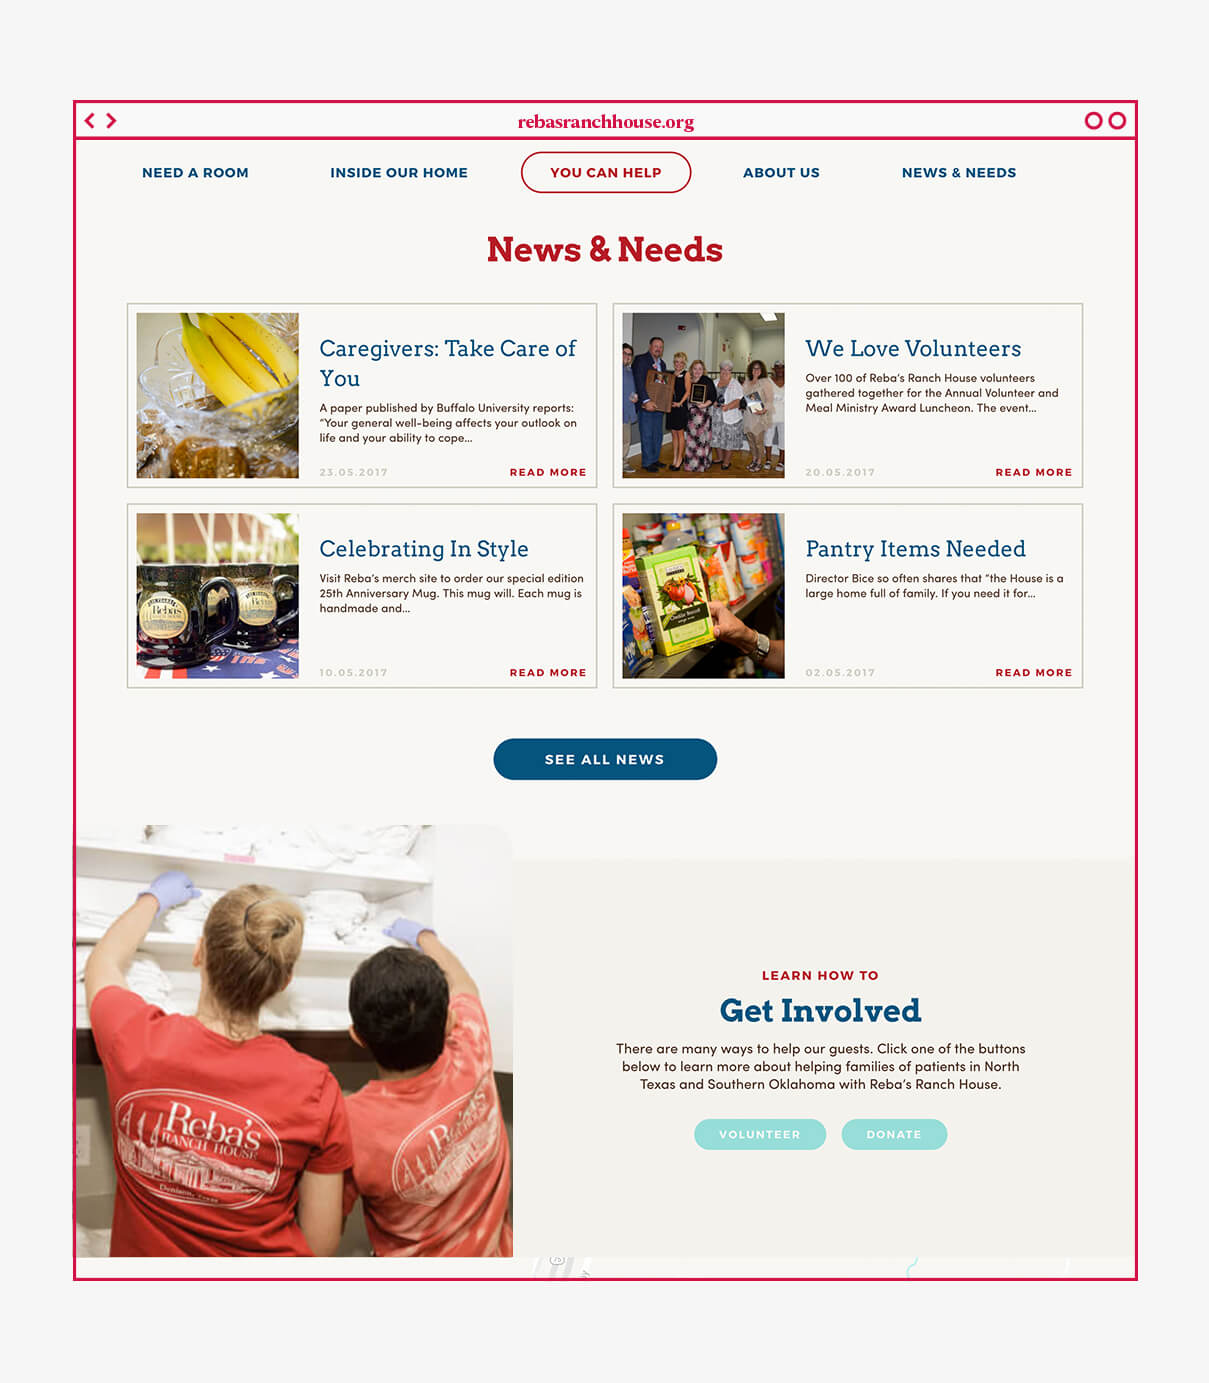 Website design featuring news feed and volunteer call to action for Rebas Ranch House, a charity organization in Denison, Texas